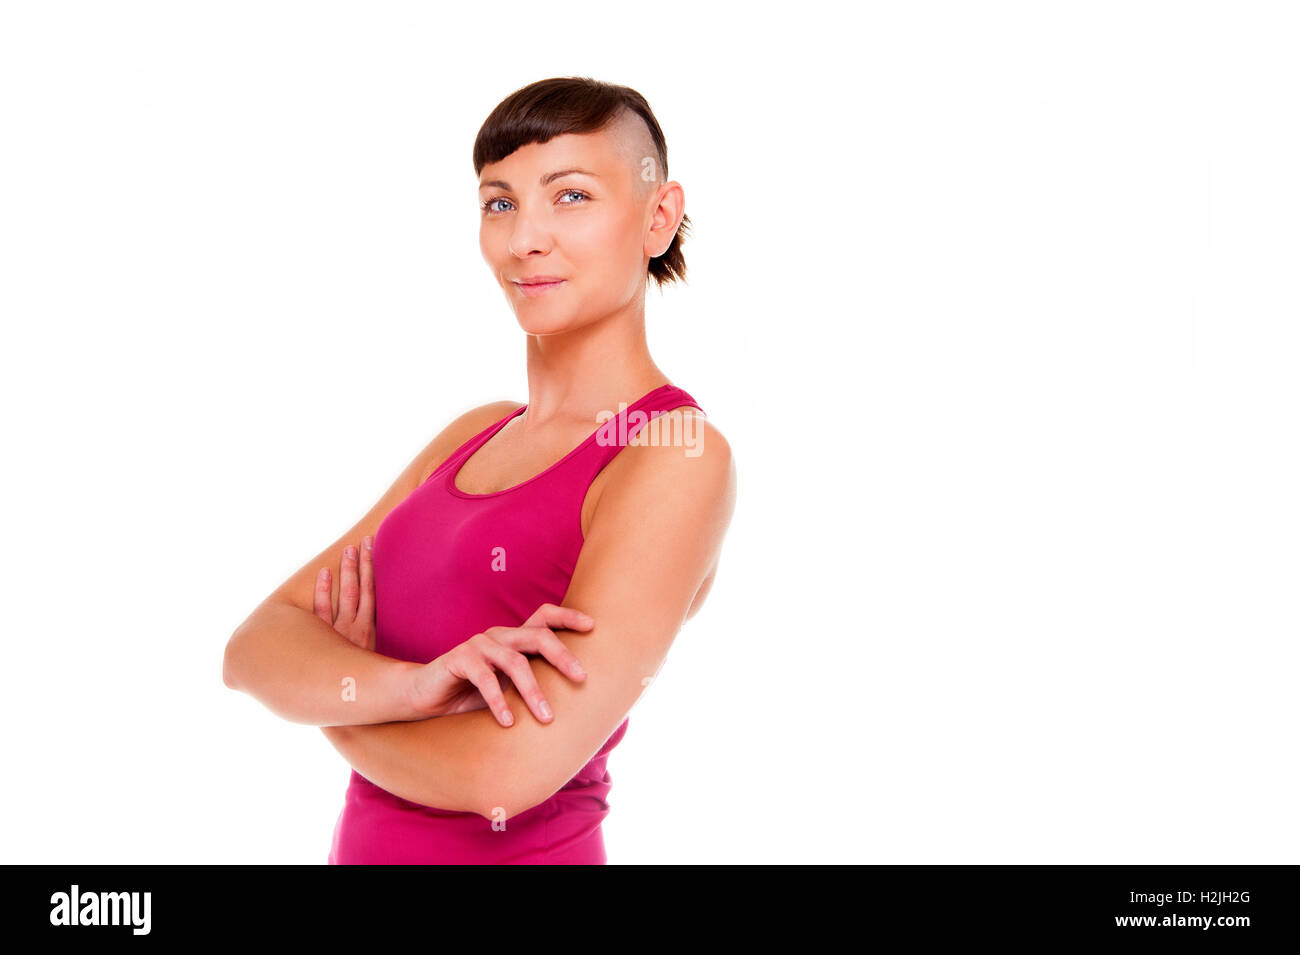 Young woman in fitness outfit with crossed arms over white background smiling at camera. Stock Photo